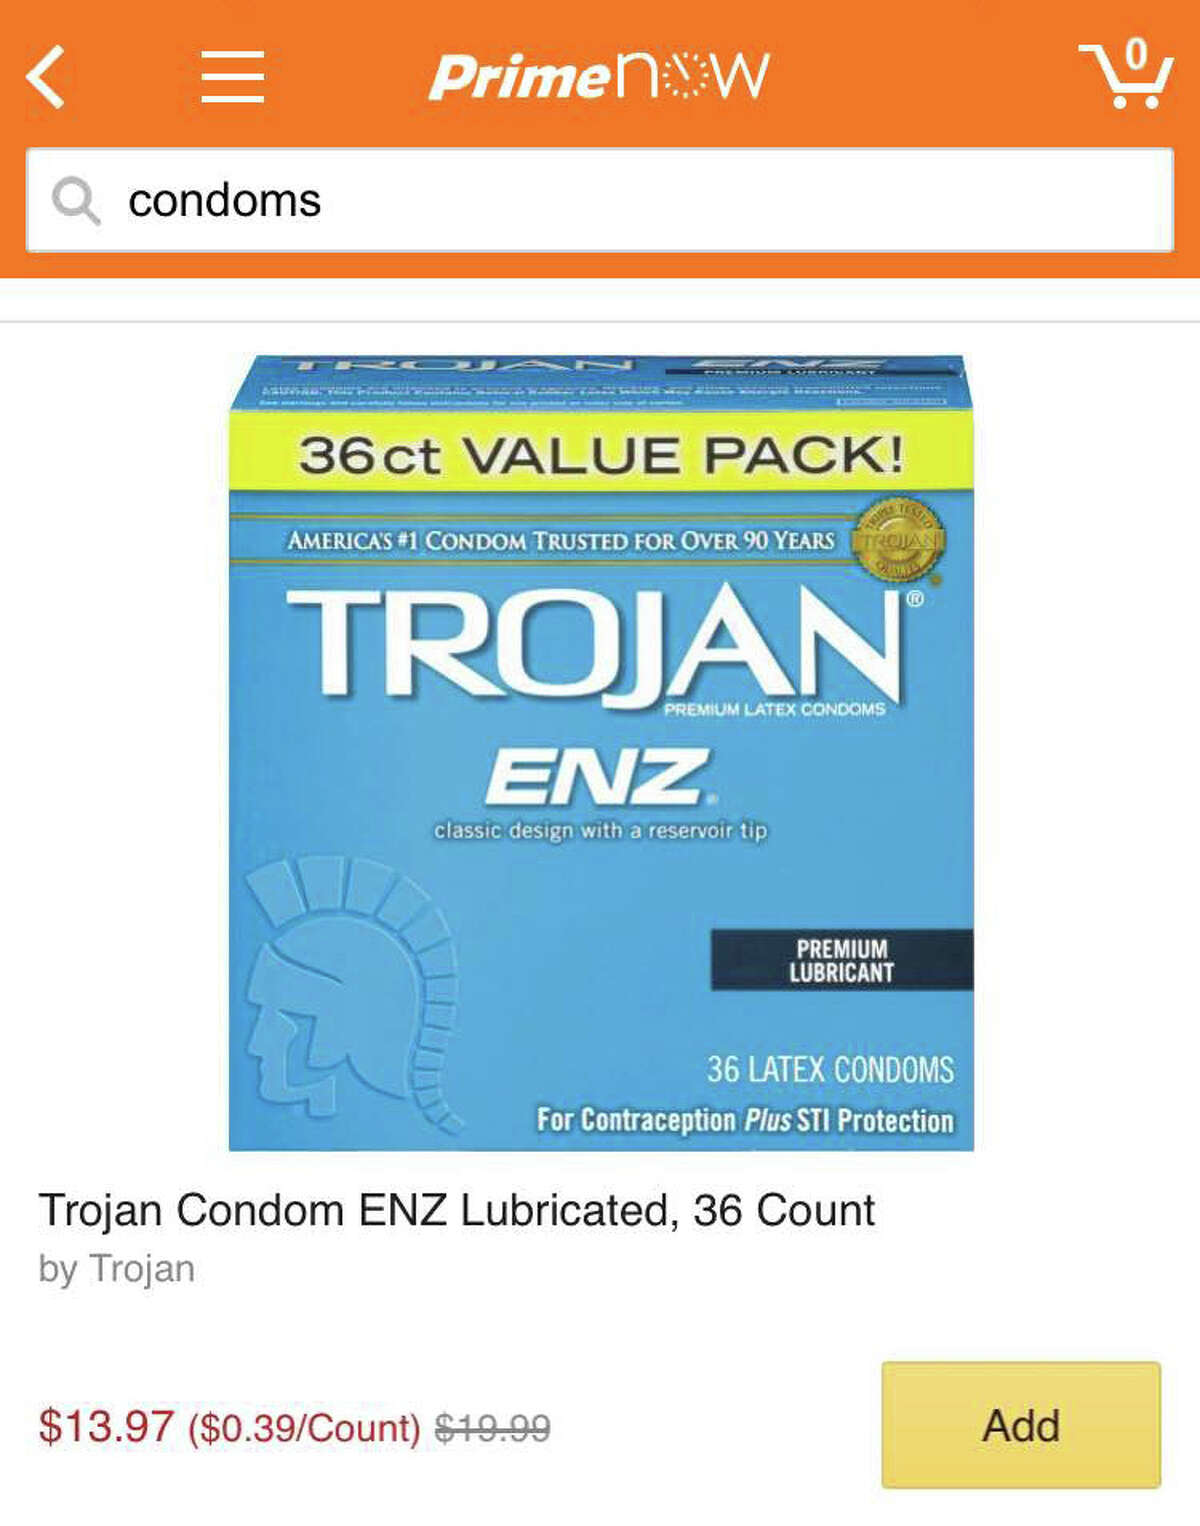 2.Condoms. When you haven’t got time for that clerk’s sly smile at your neighborhood convenience or drug store.